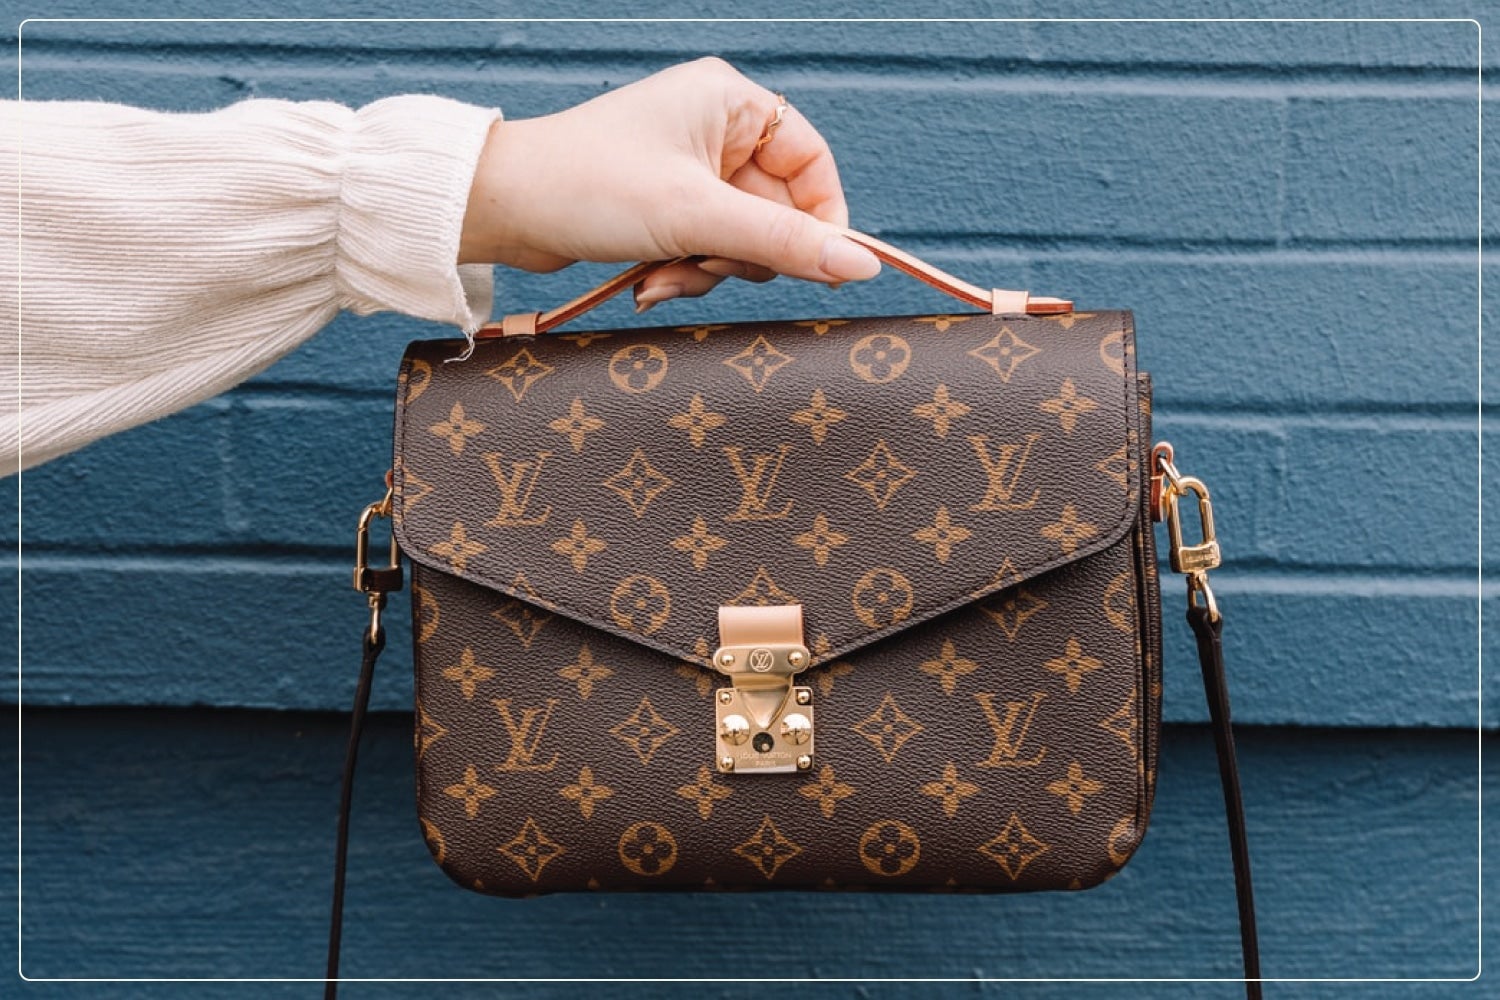 featured image for post: How to Spot a Fake Louis Vuitton